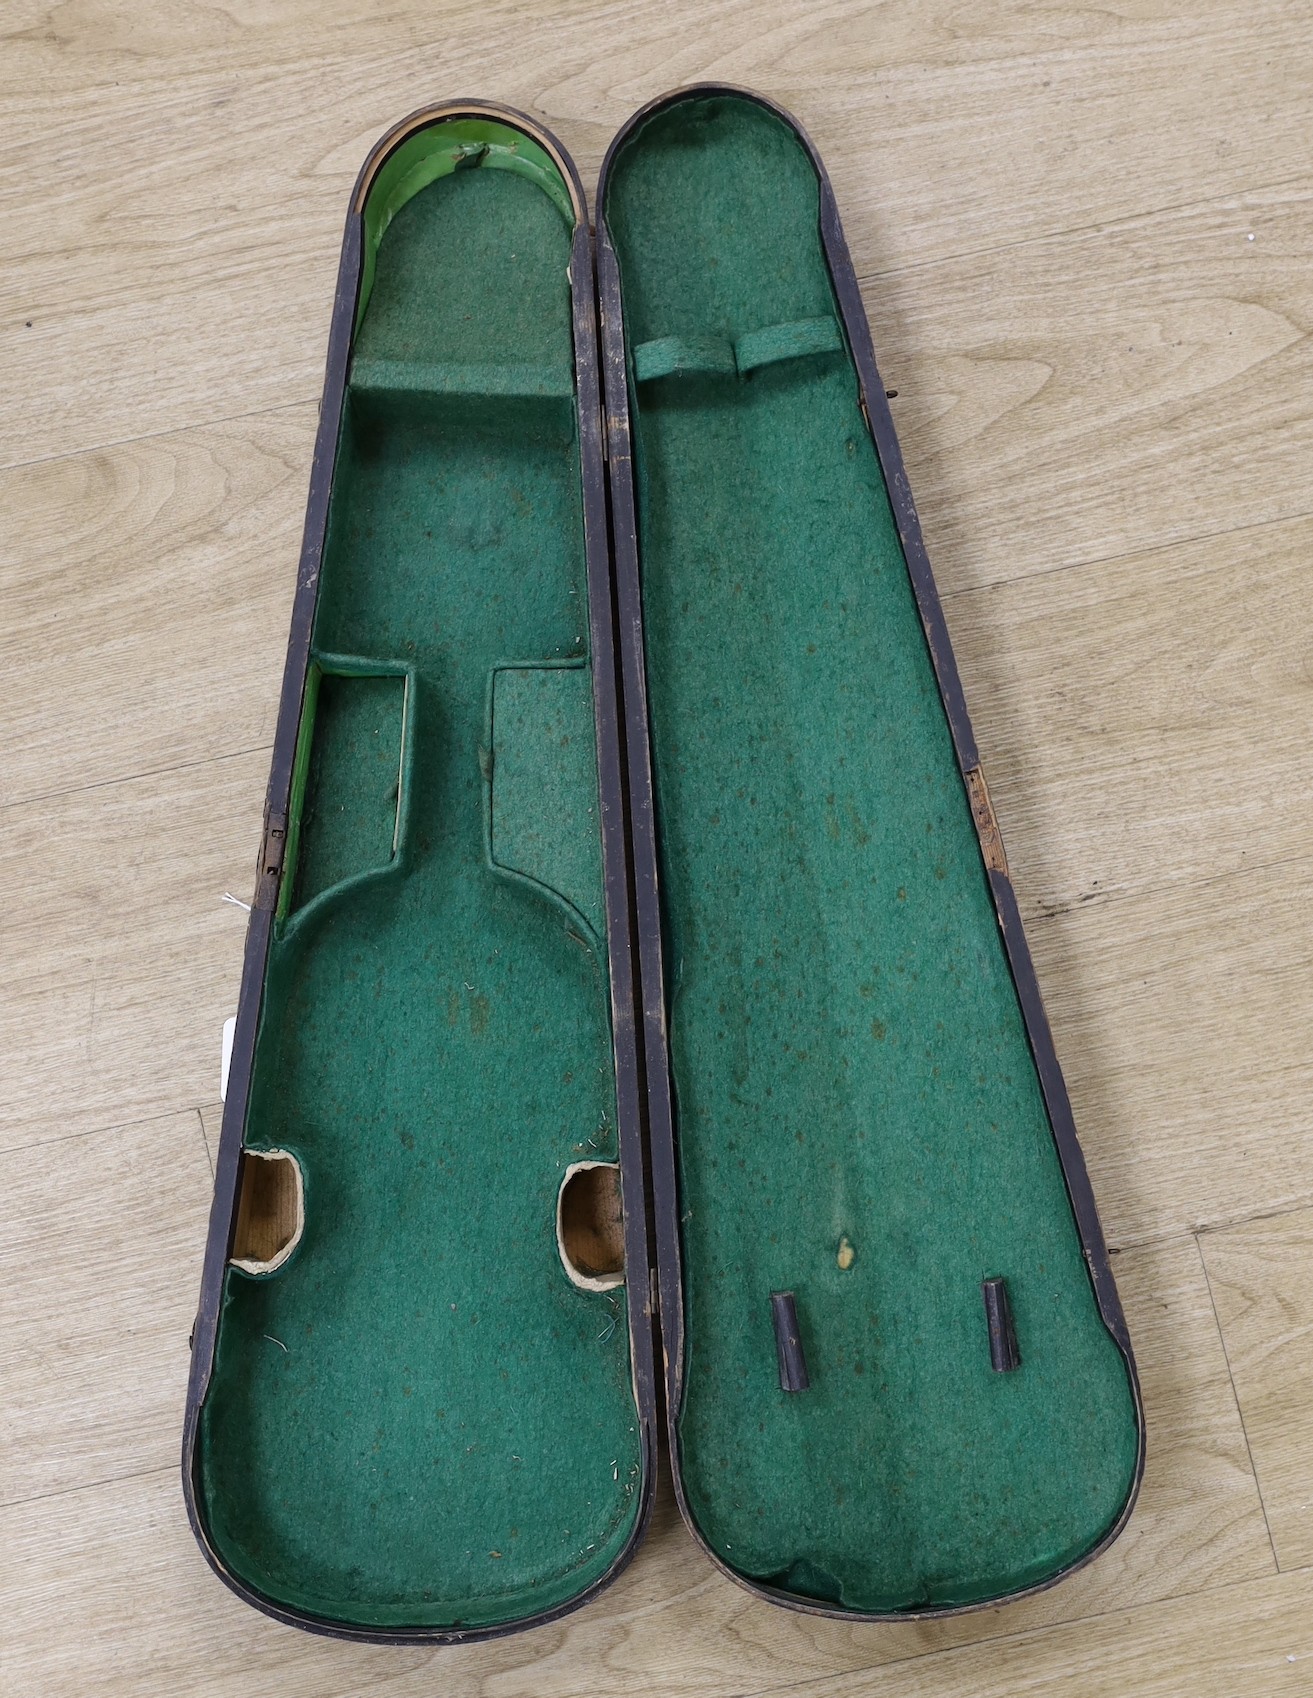 A wooden coffin style violin case, 79cm long - Image 3 of 3